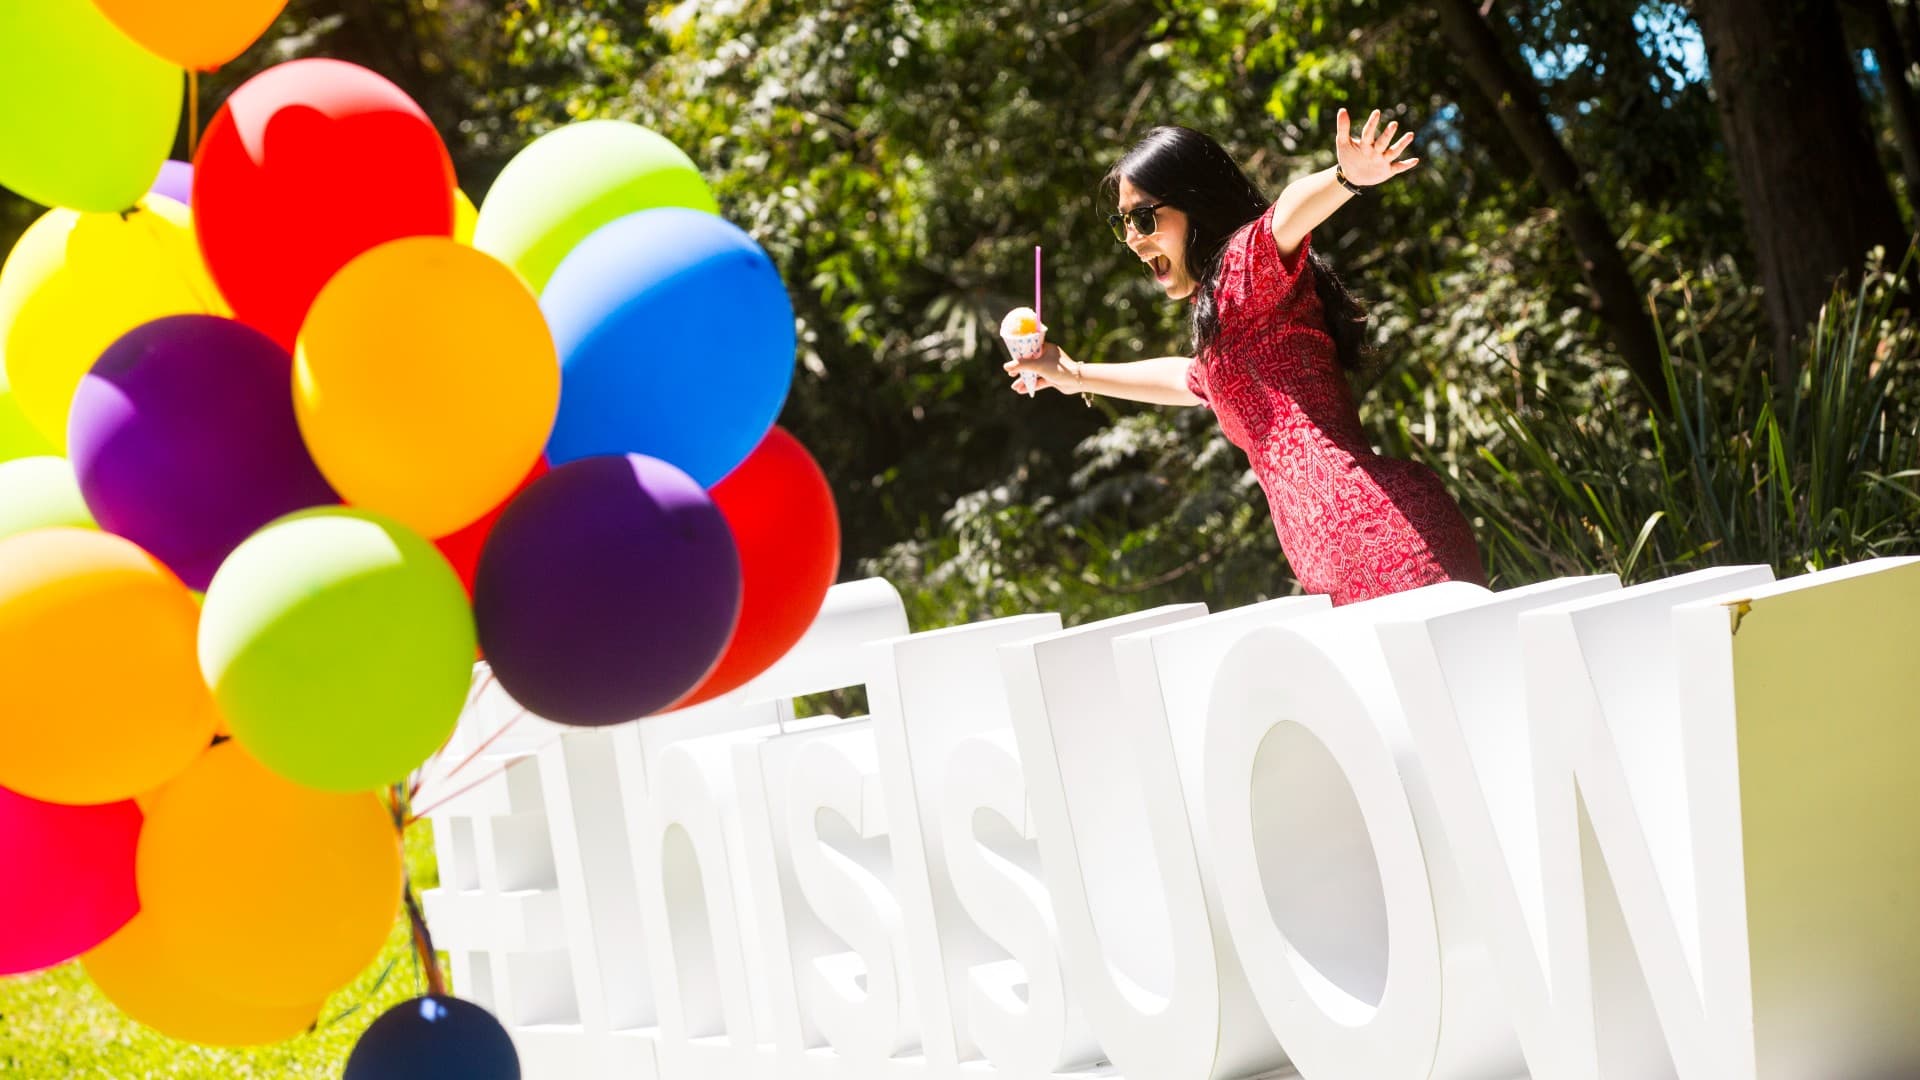 A student poses for a photo during O-Week at UOW's Wollongong Campus. Photo: Paul Jones